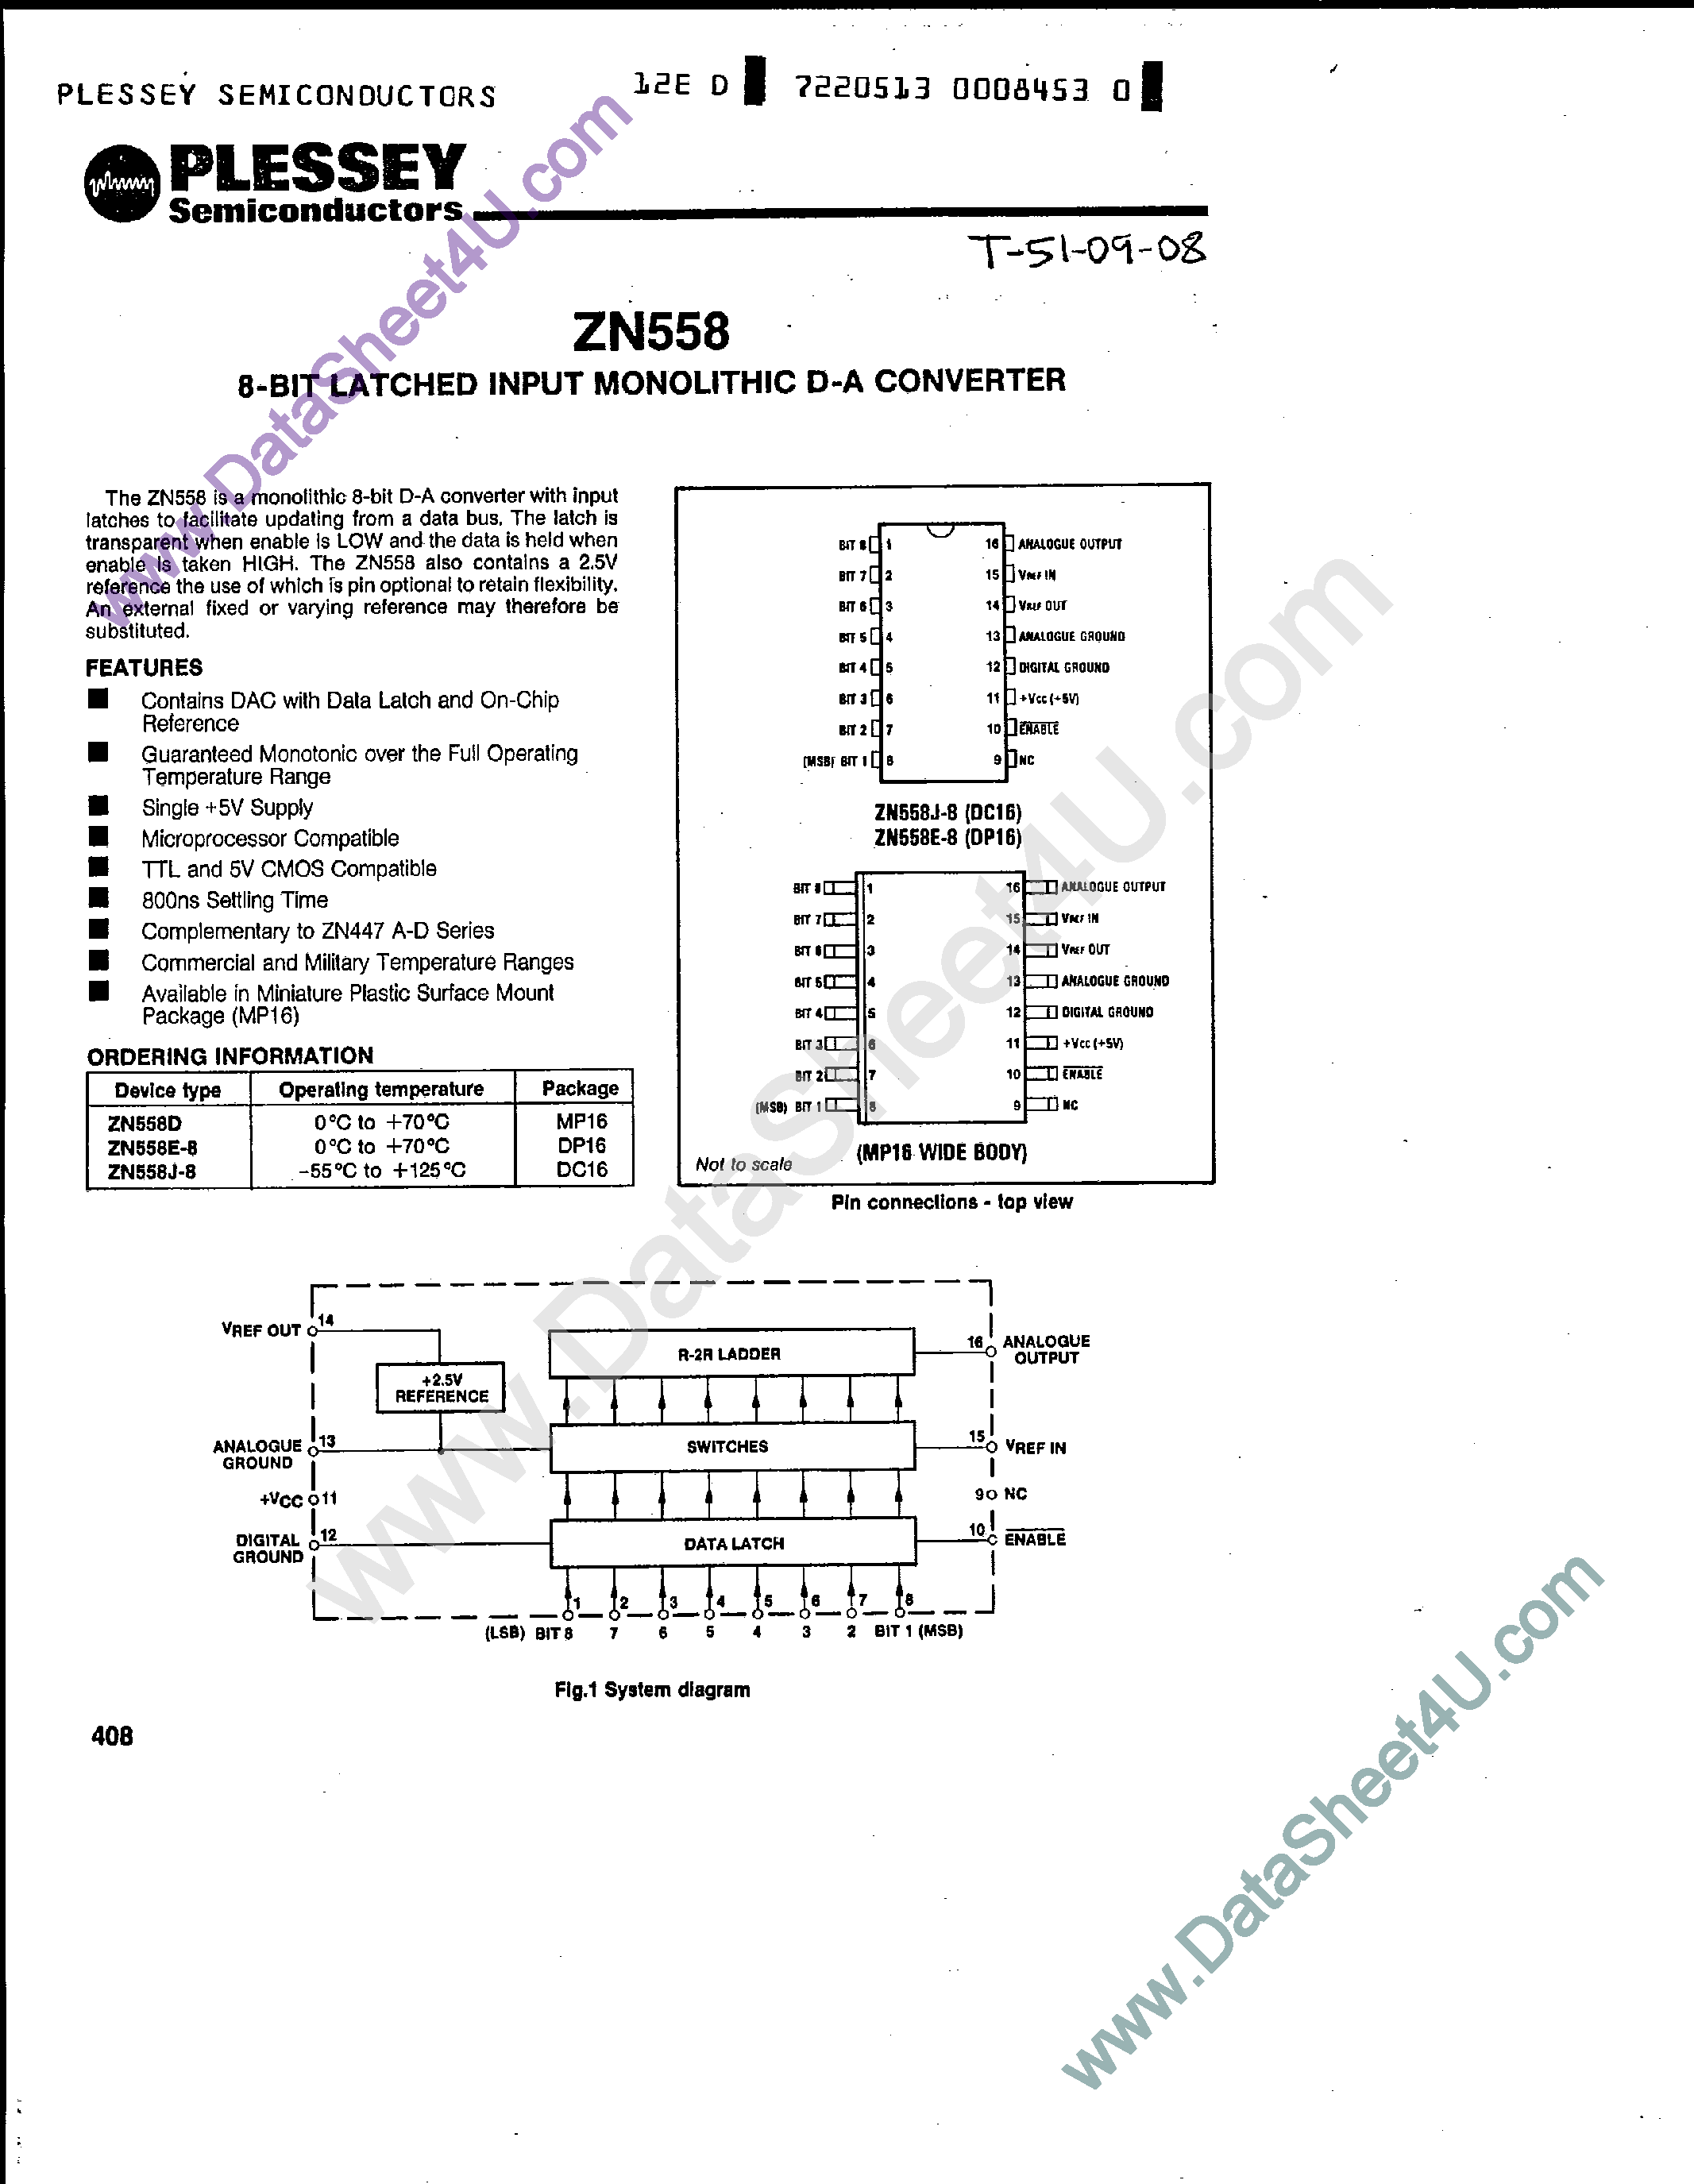 Datasheet ZN558 - 8-Bit Latched Input Monolithic D-A Converter page 1